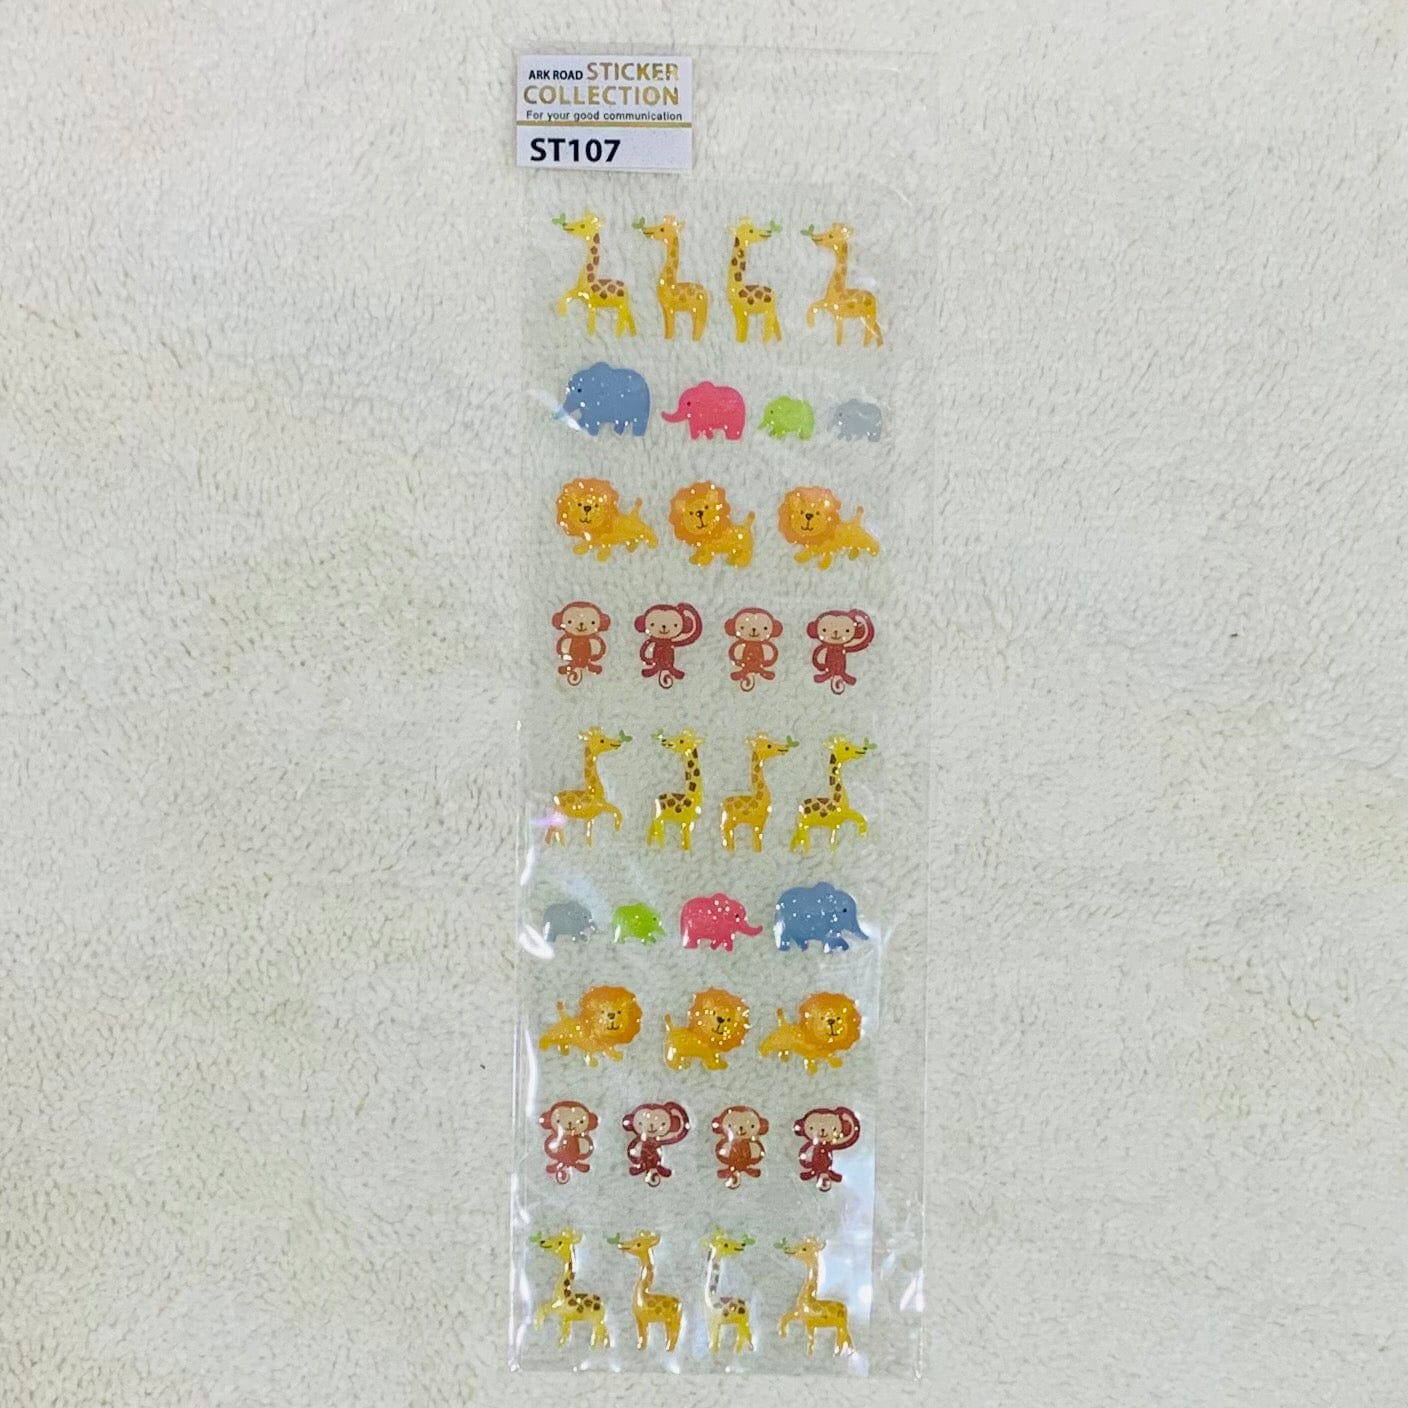 San-X Relax Bear Sparkly Micro Stickers